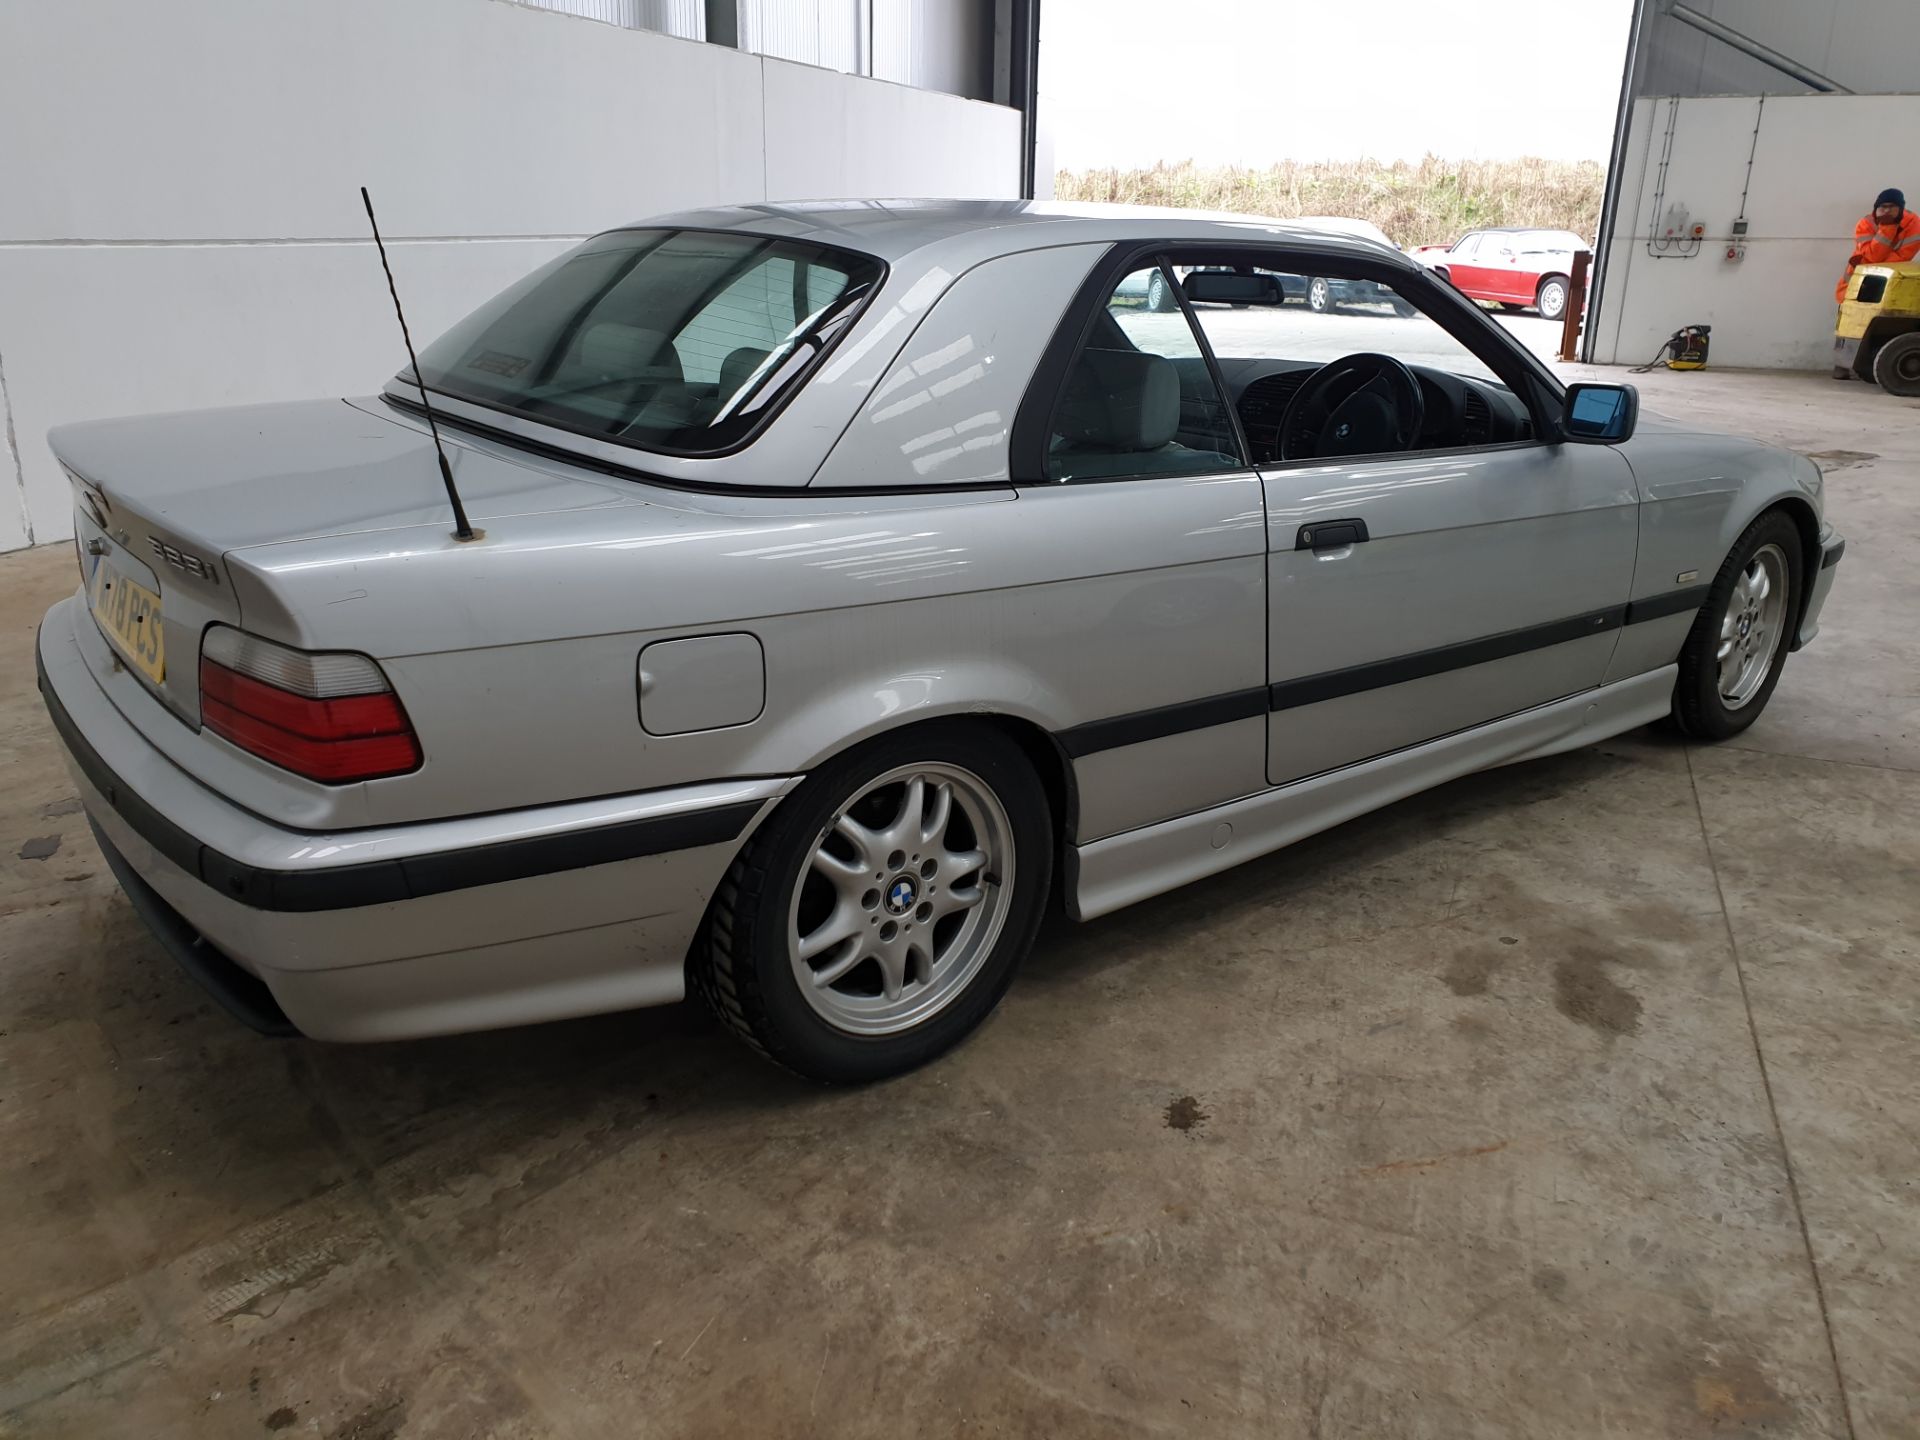 BMW 323 Convertible - Image 3 of 13